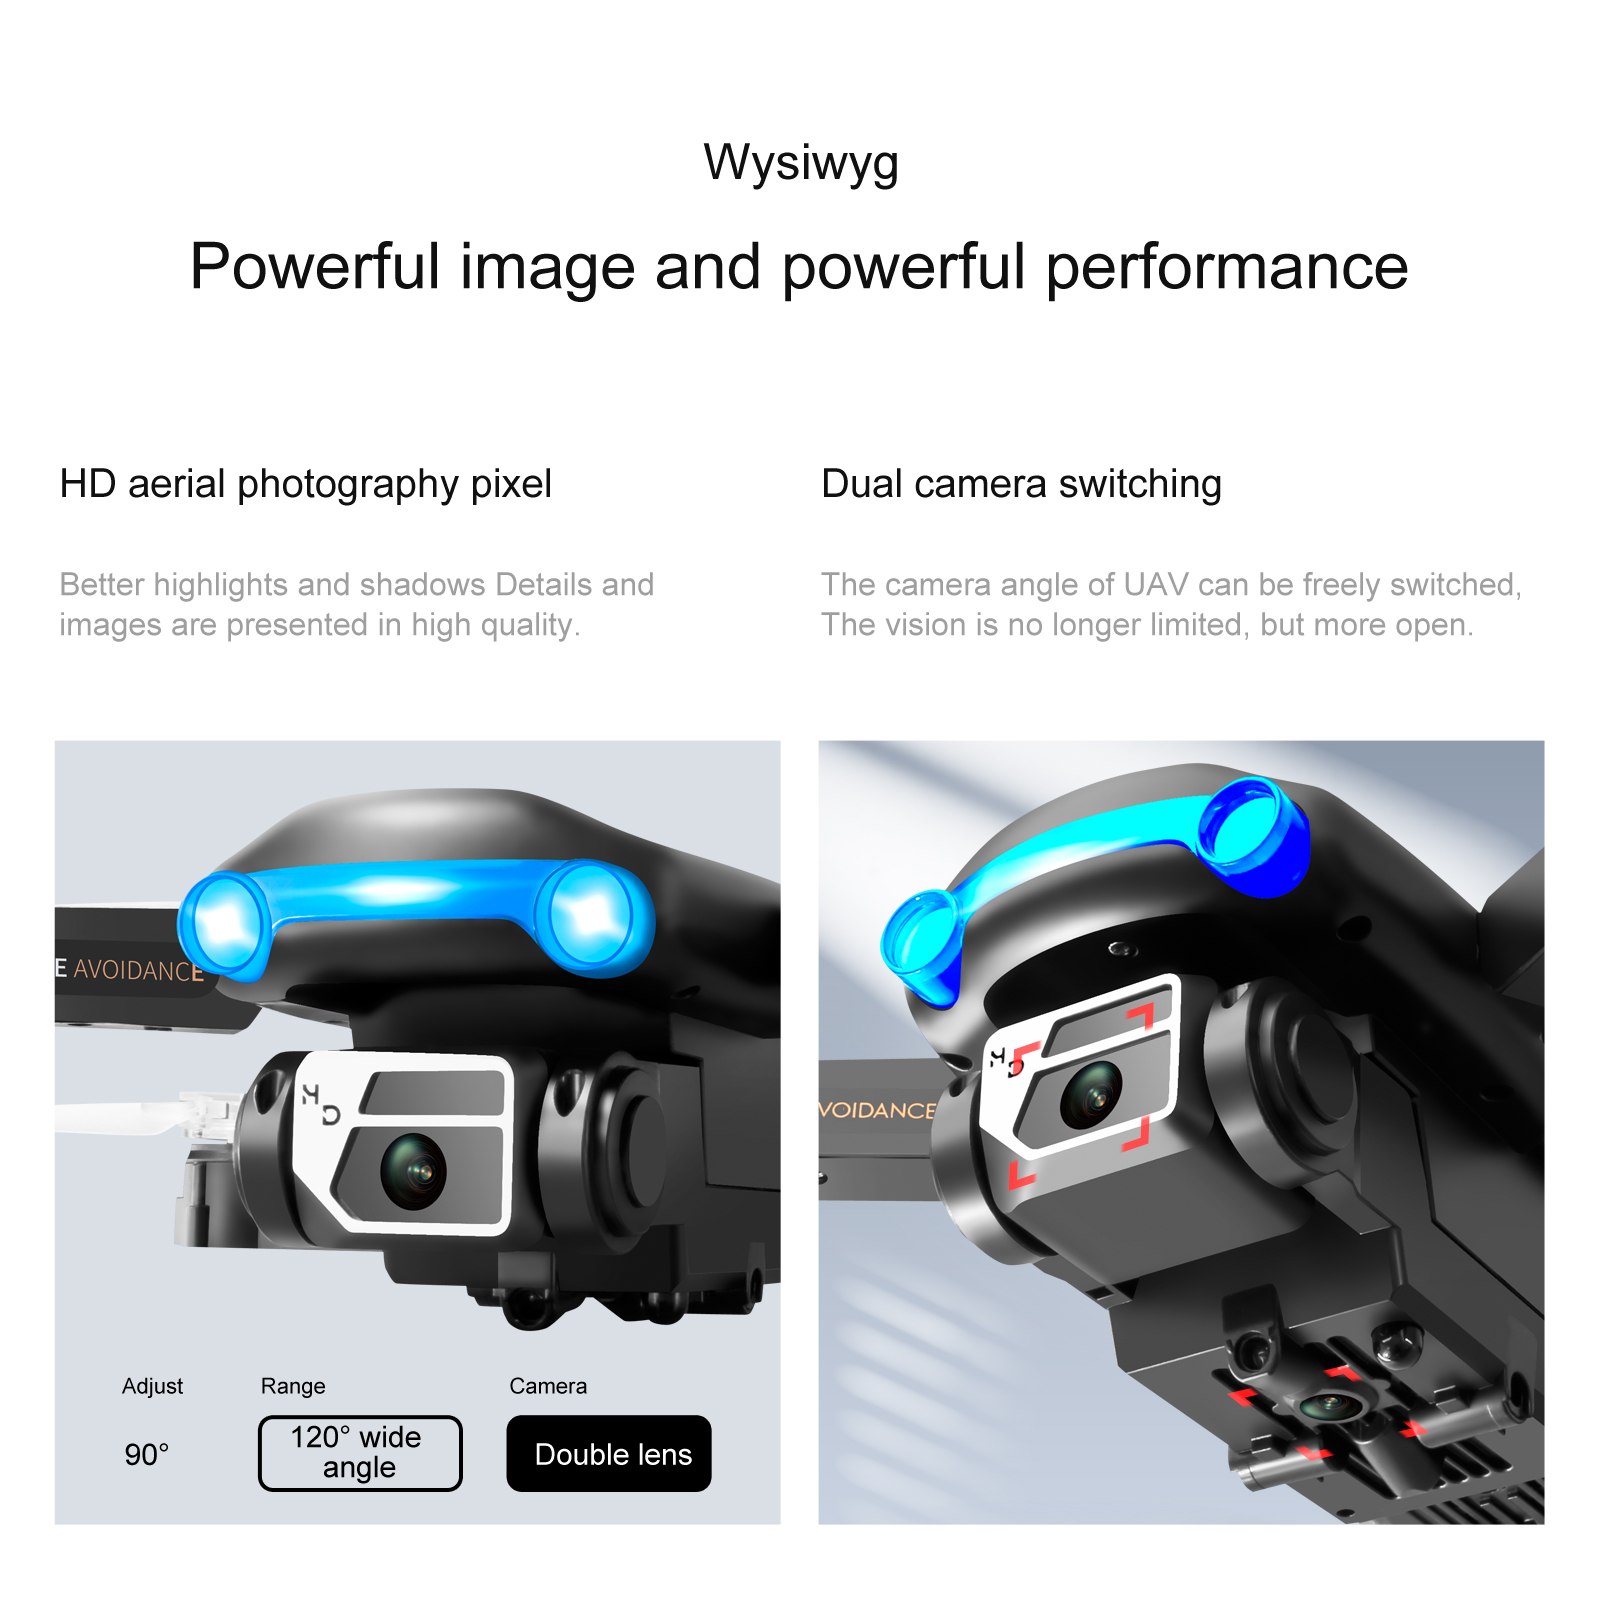 YLRC S98 WIFI FPV with 4K HD Dual Camera 360° Obstacle Avoidance Optical Flow Positioning LED Controllable Light  RC Drone Quadcopter RTF